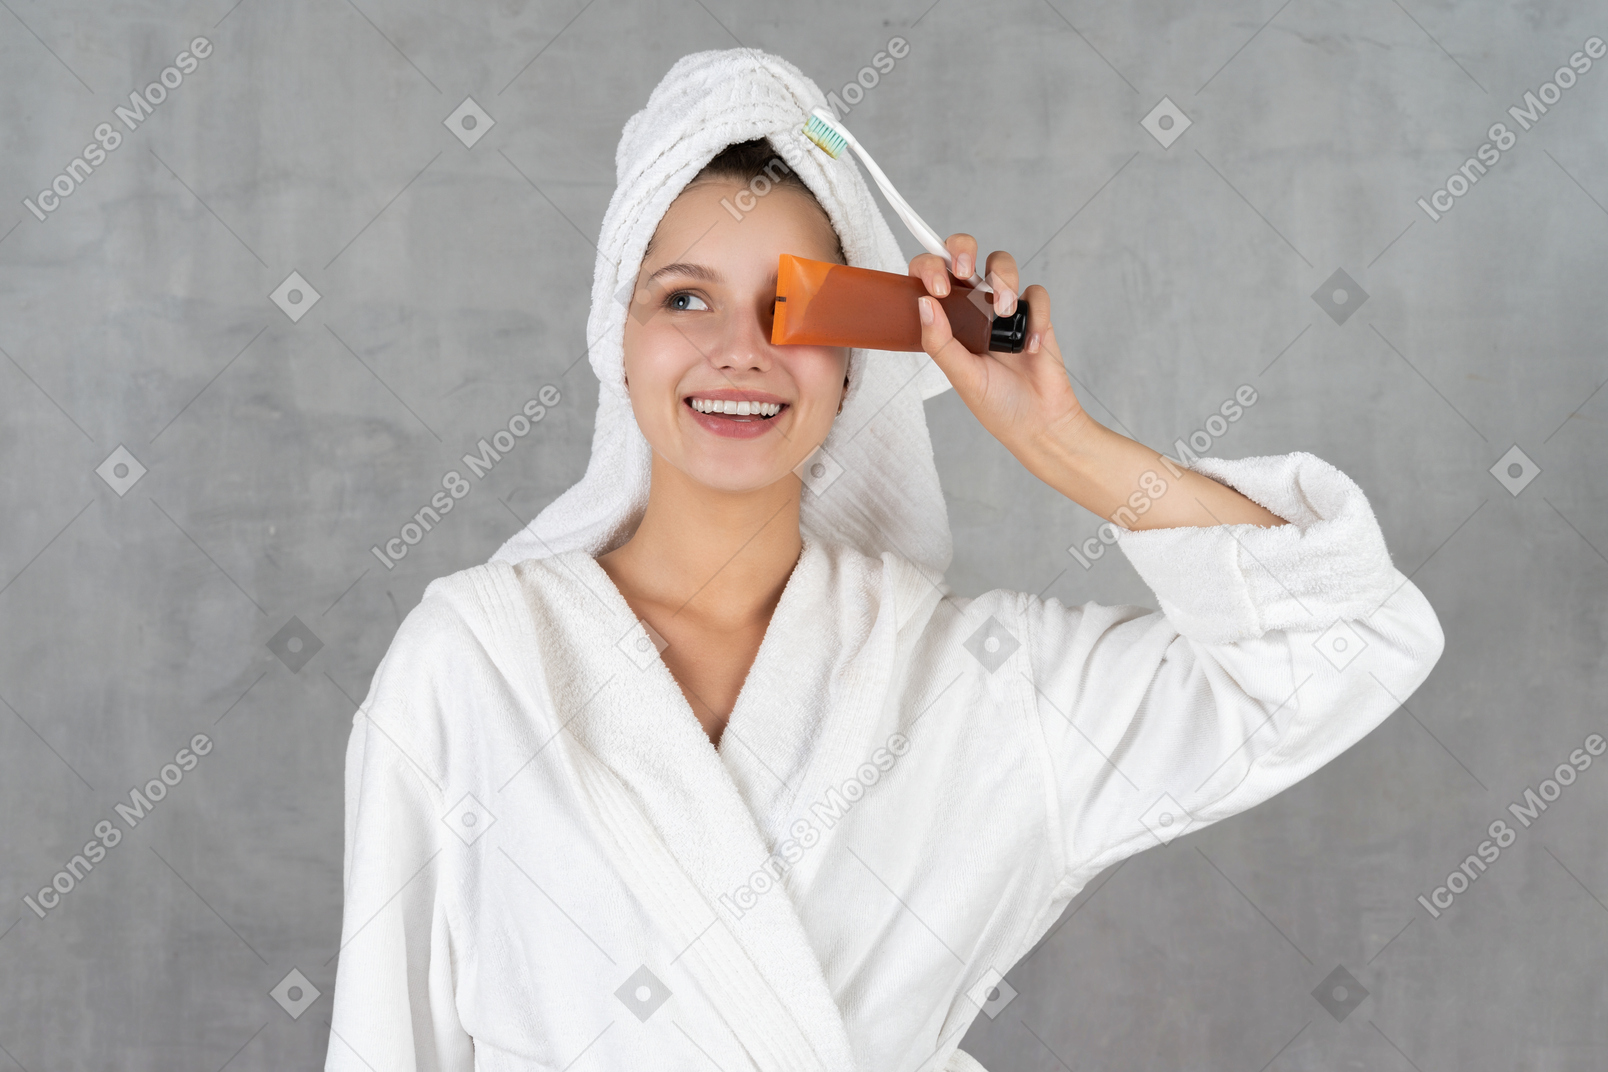 Woman in bathrobe smiling while holding tube over eye